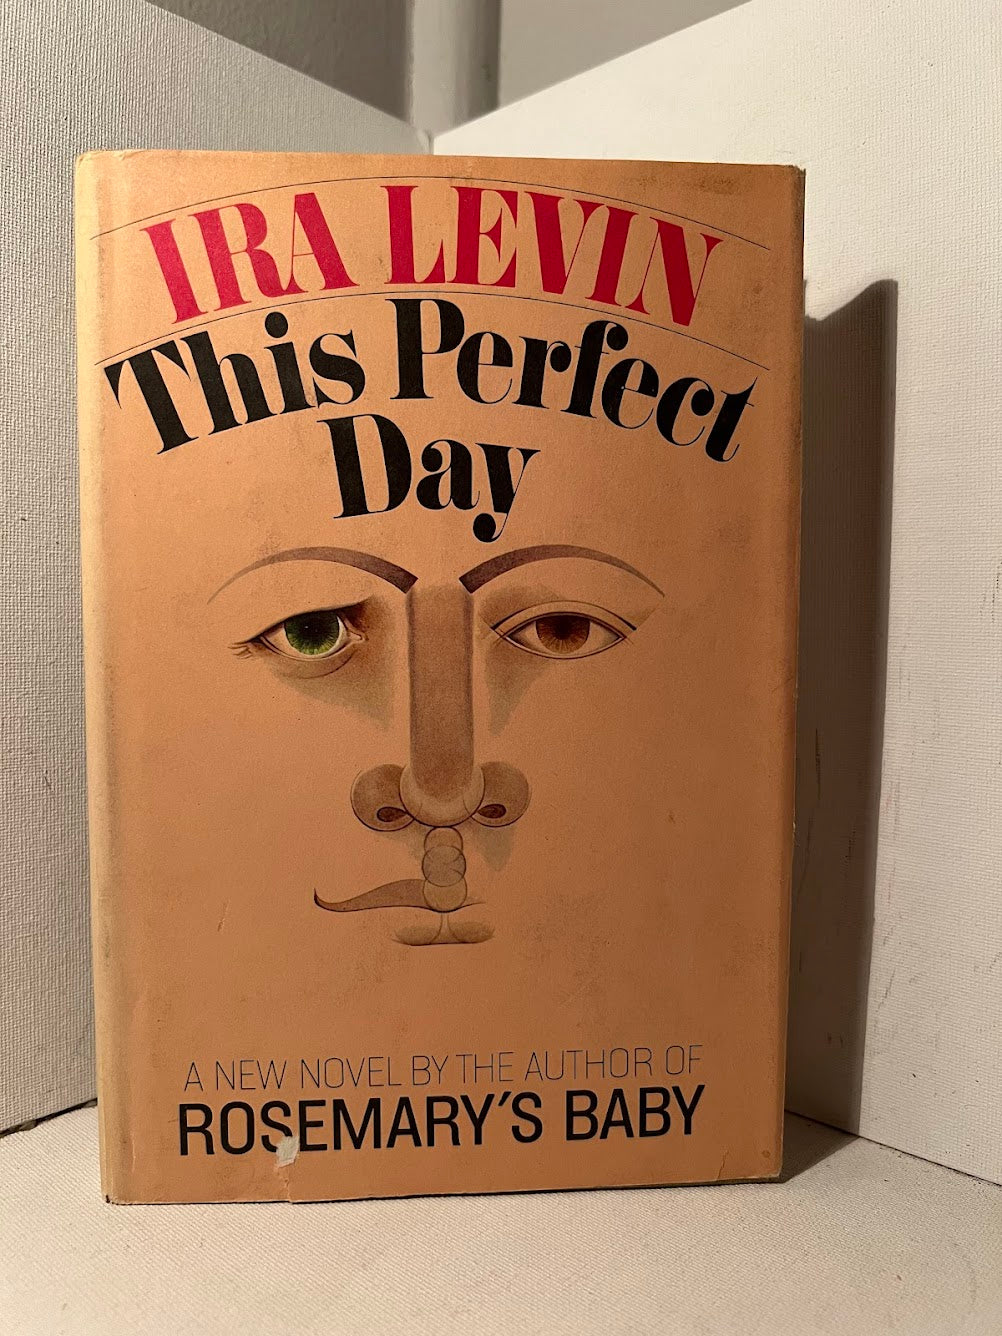 This Perfect Day by Ira Levin